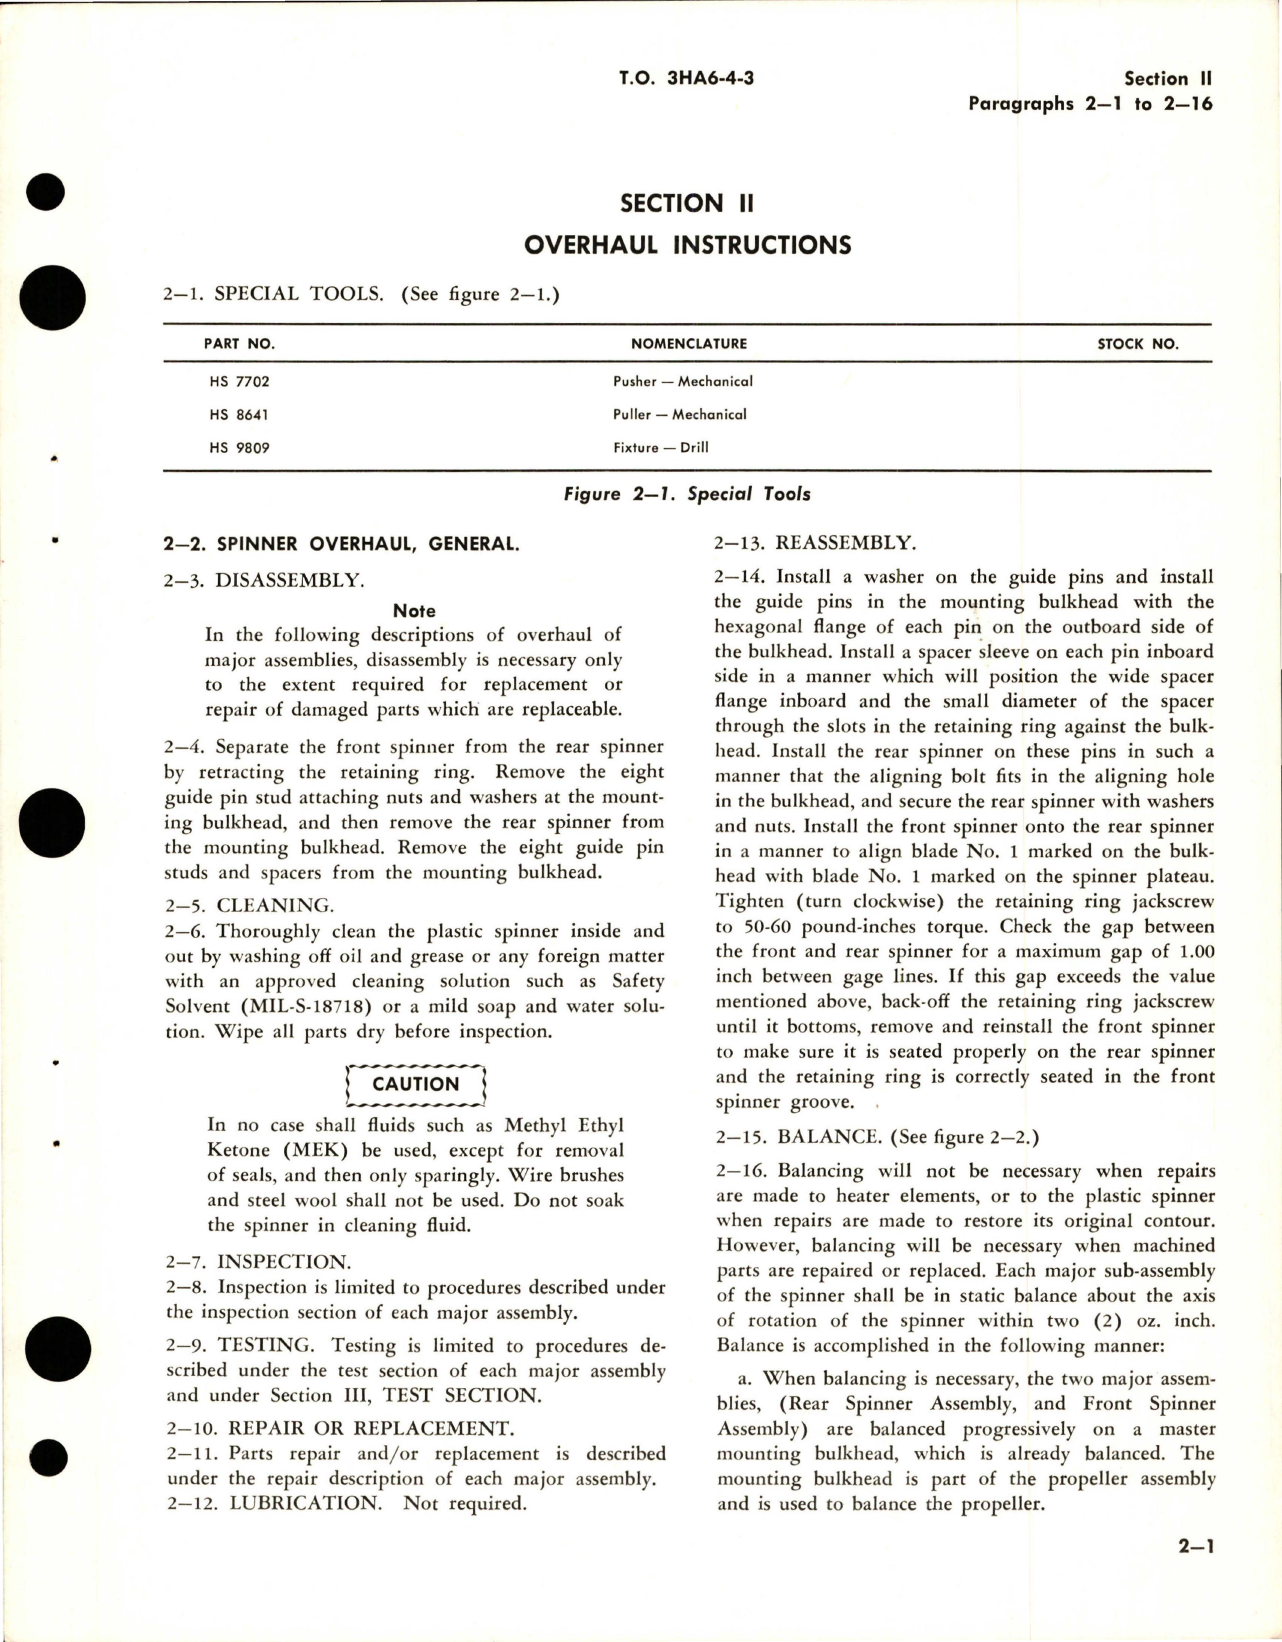 Sample page 7 from AirCorps Library document: Overhaul Instructions for Aircraft Propeller Spinner and Anti-Icing - Part 557615 